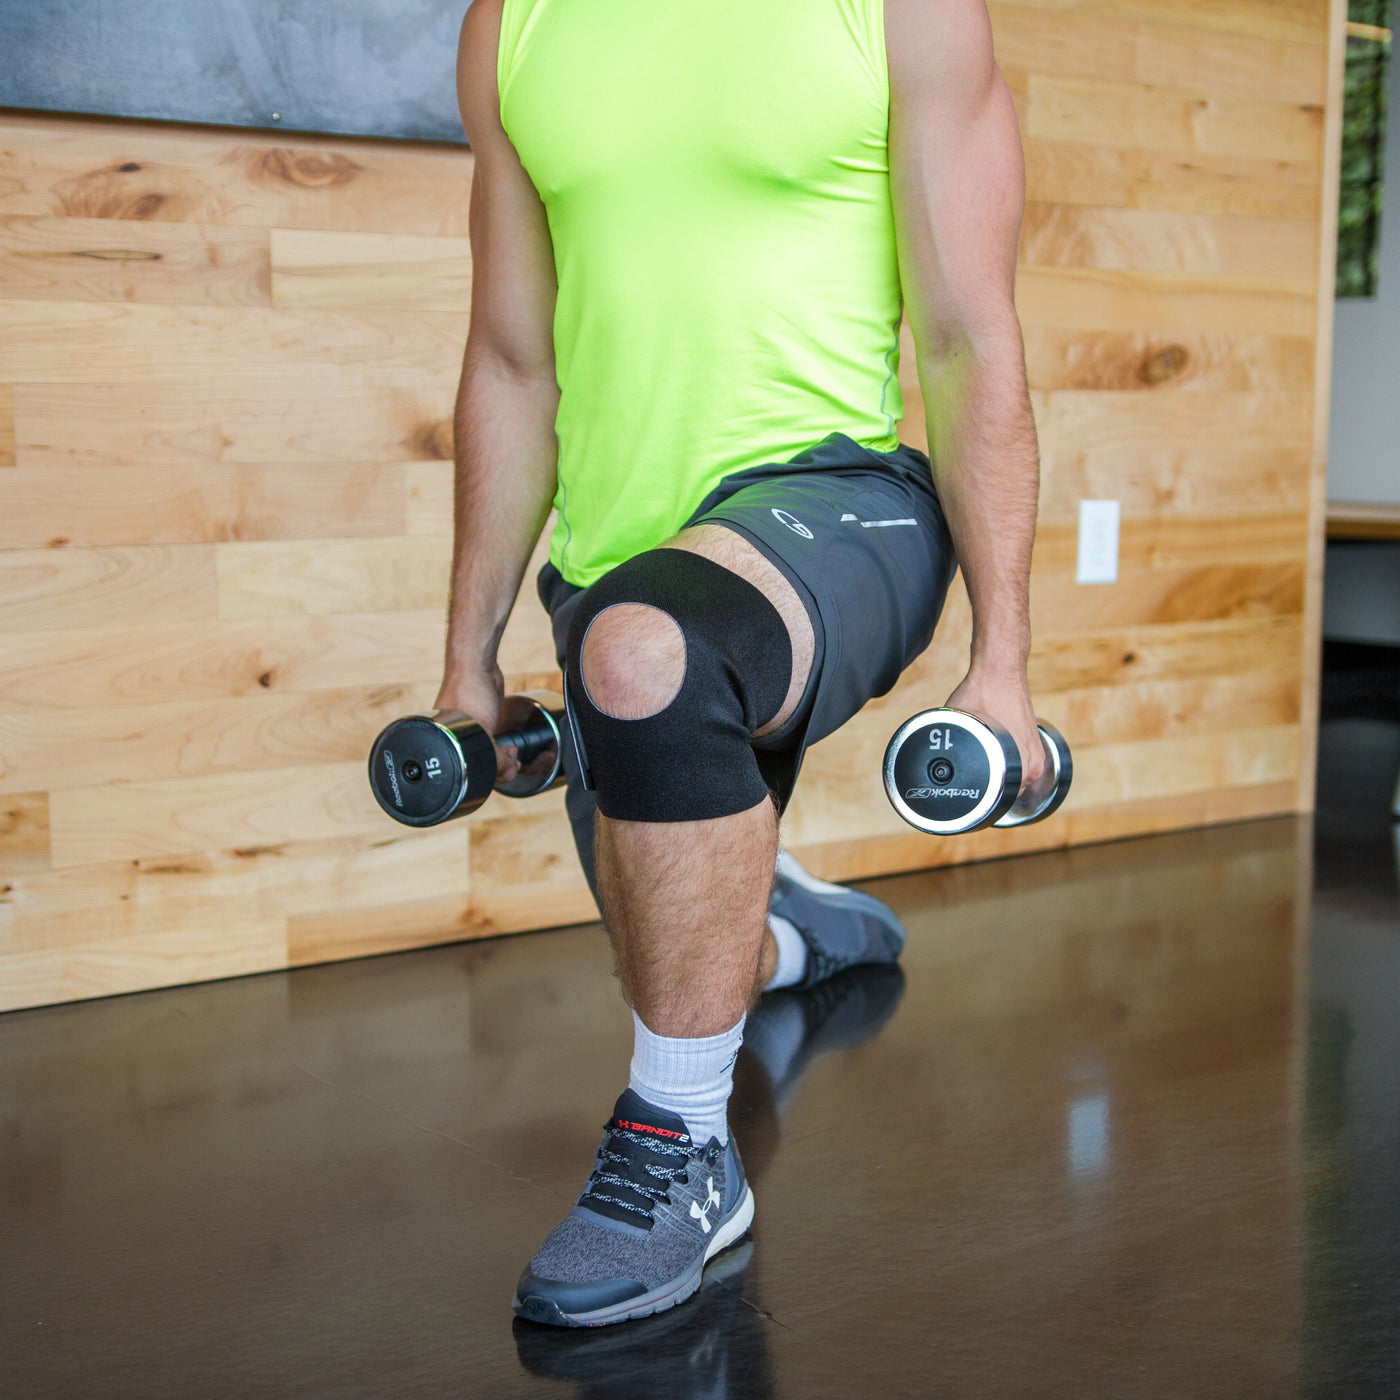 Use this athletic knee support for running, basketball, Crossfit, and more